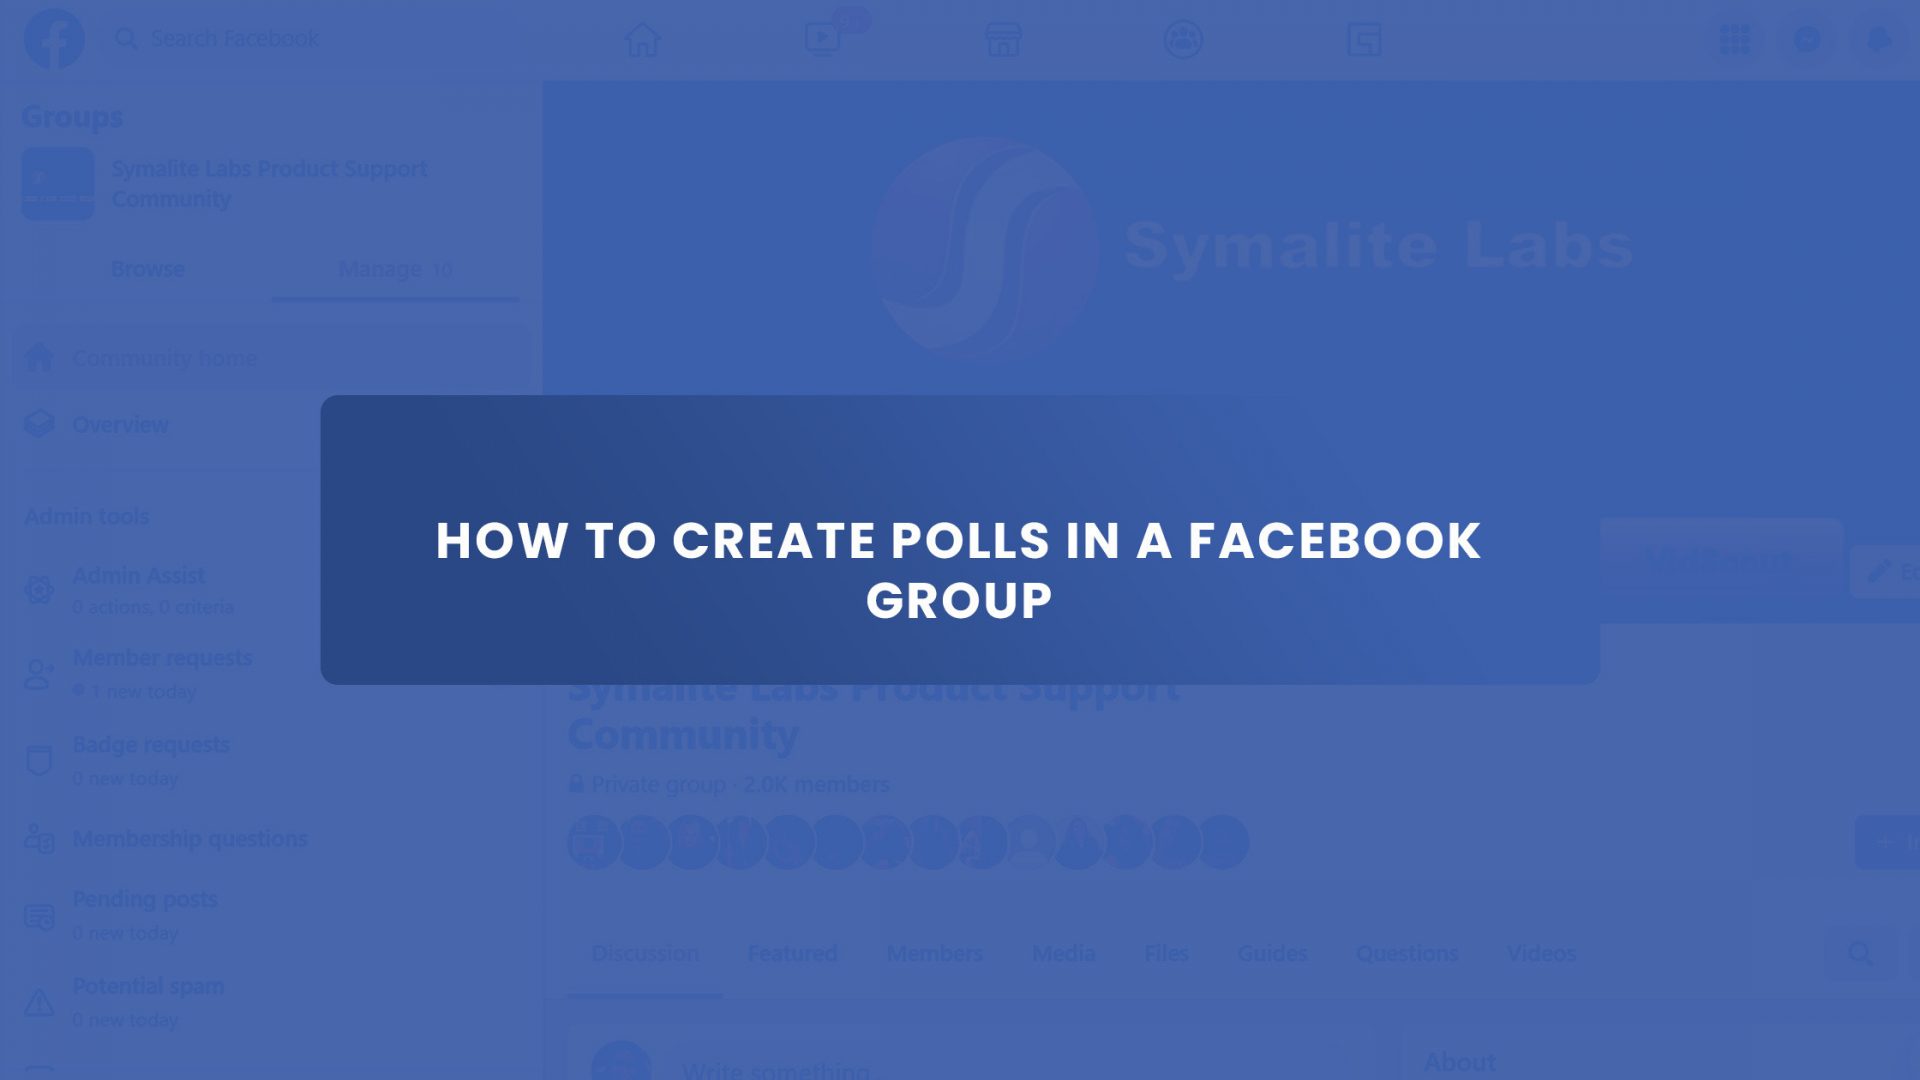 How to create polls in a facebook group